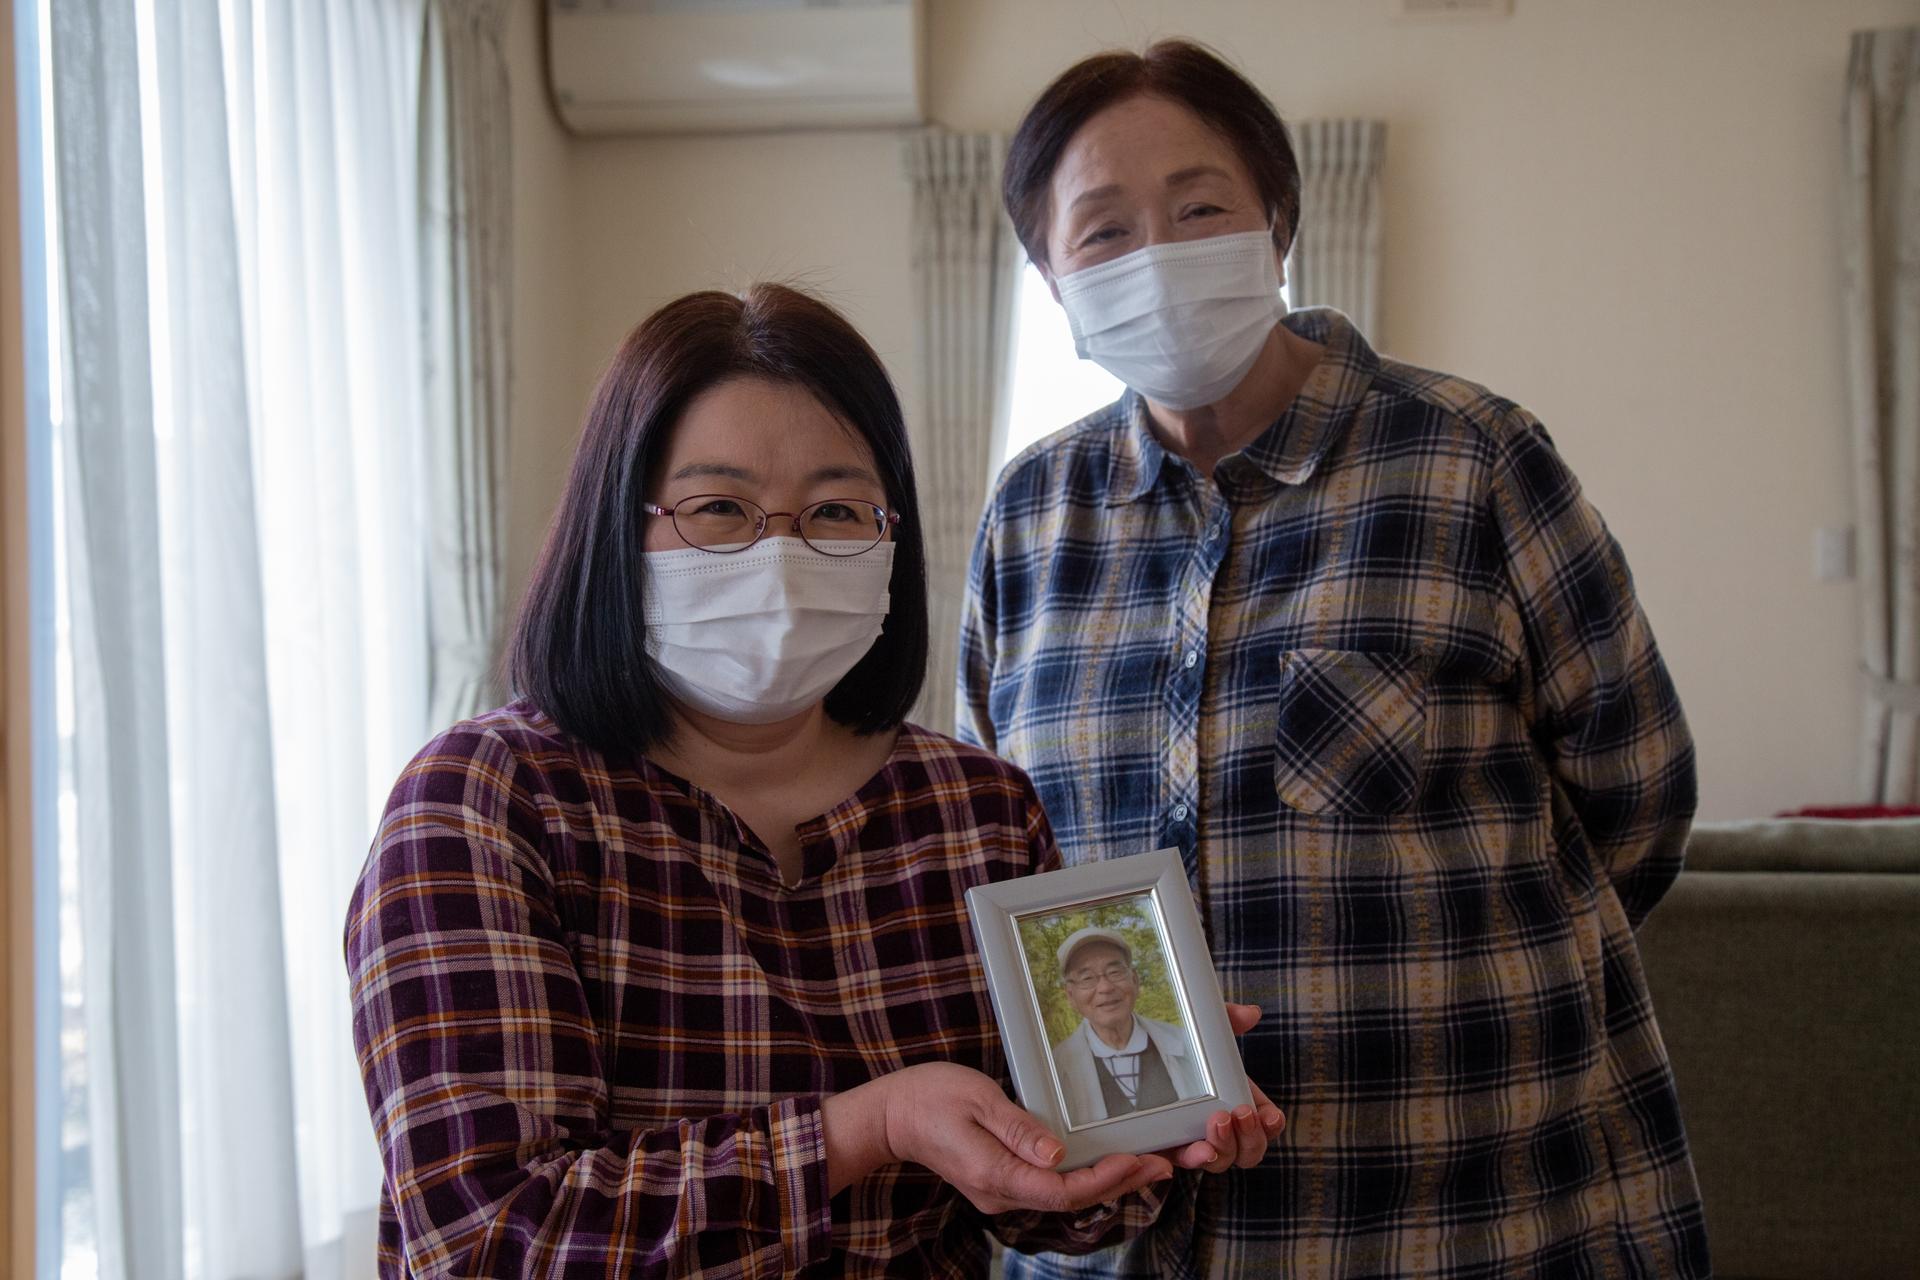 Two women are shown next two each other, both wearing medical face masks and one holding a small framed photograph.